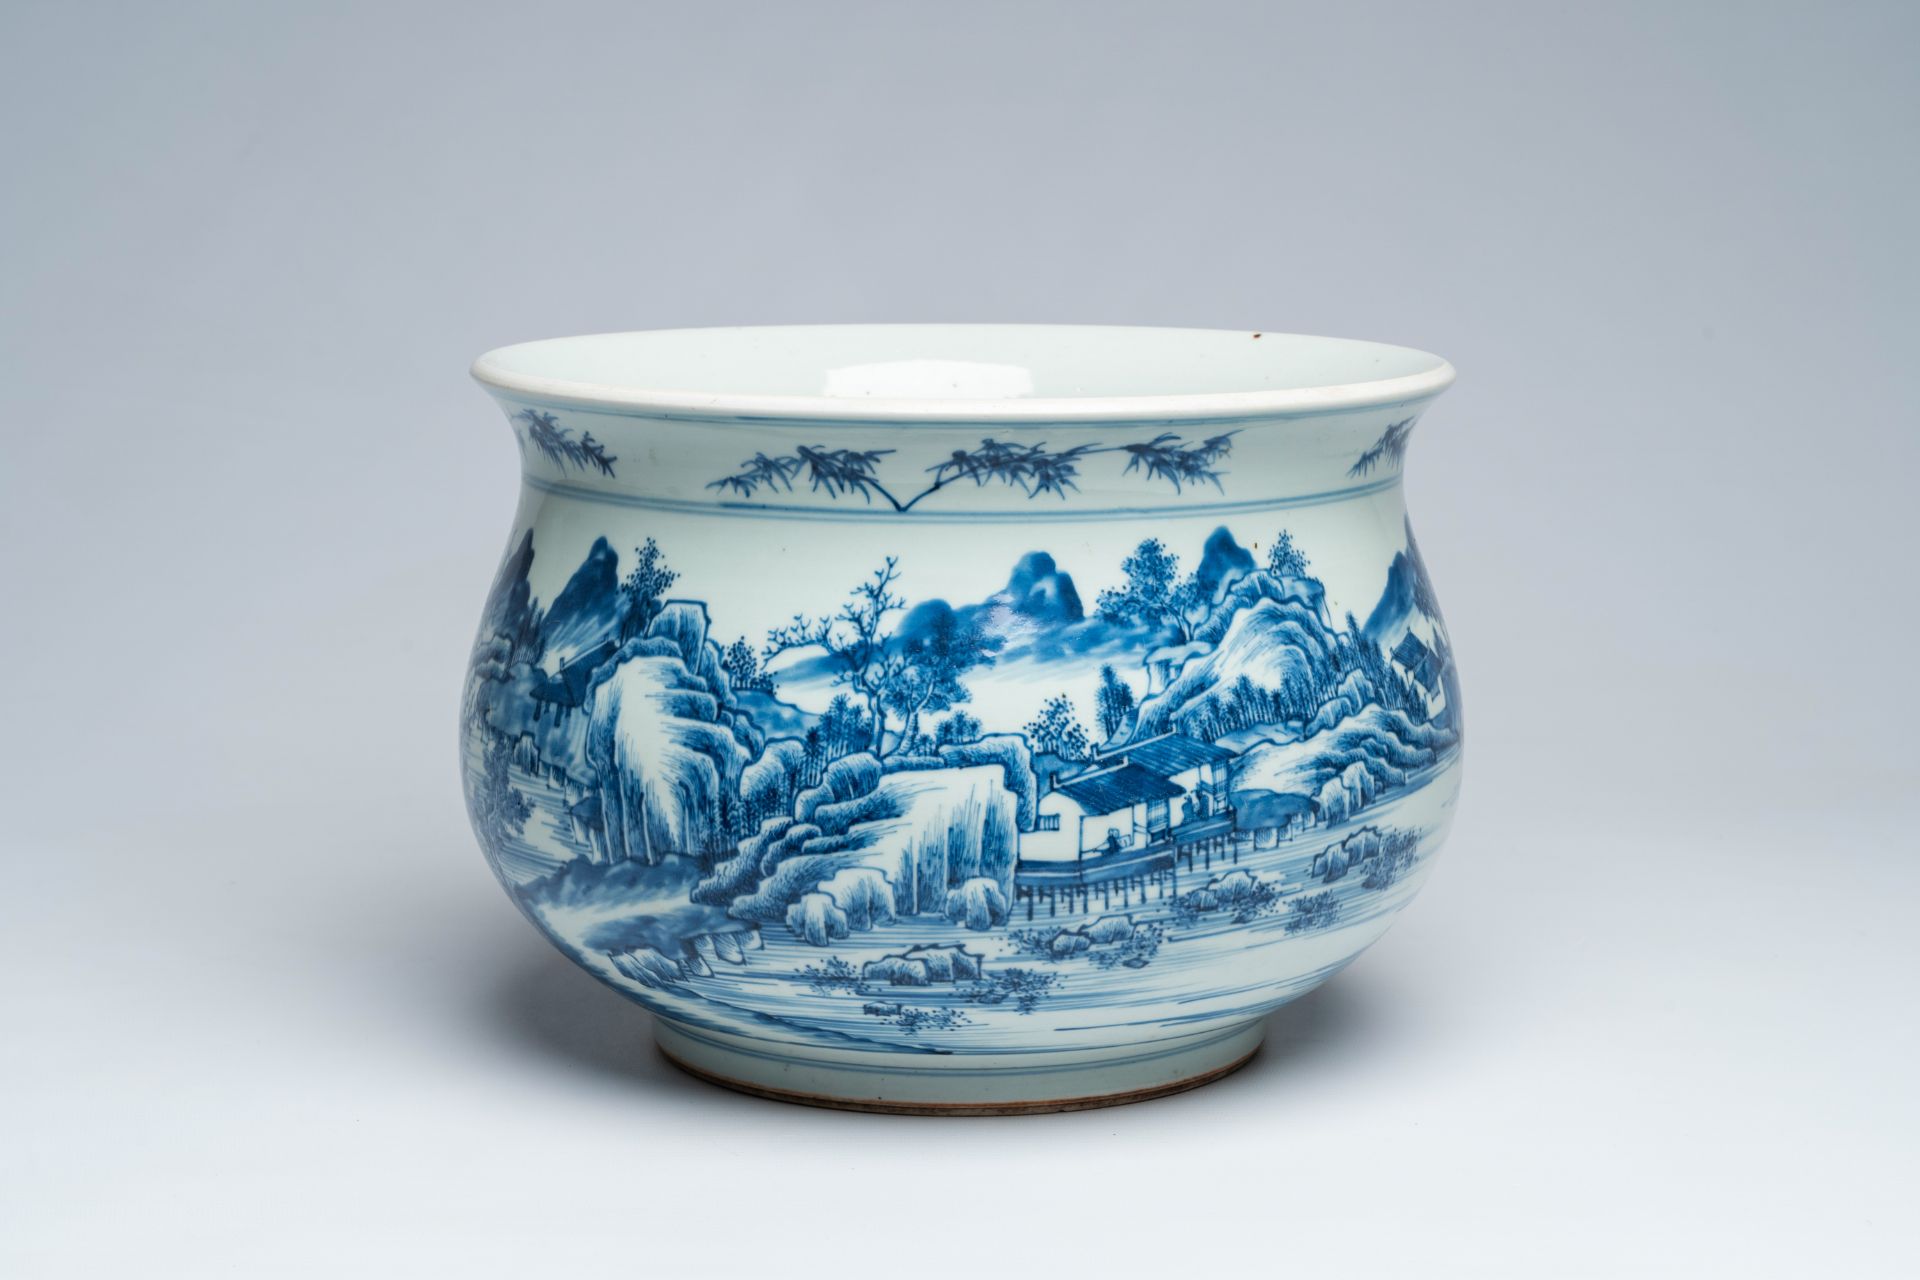 A large Chinese blue and white censer with a river landscape, 18th C. or later